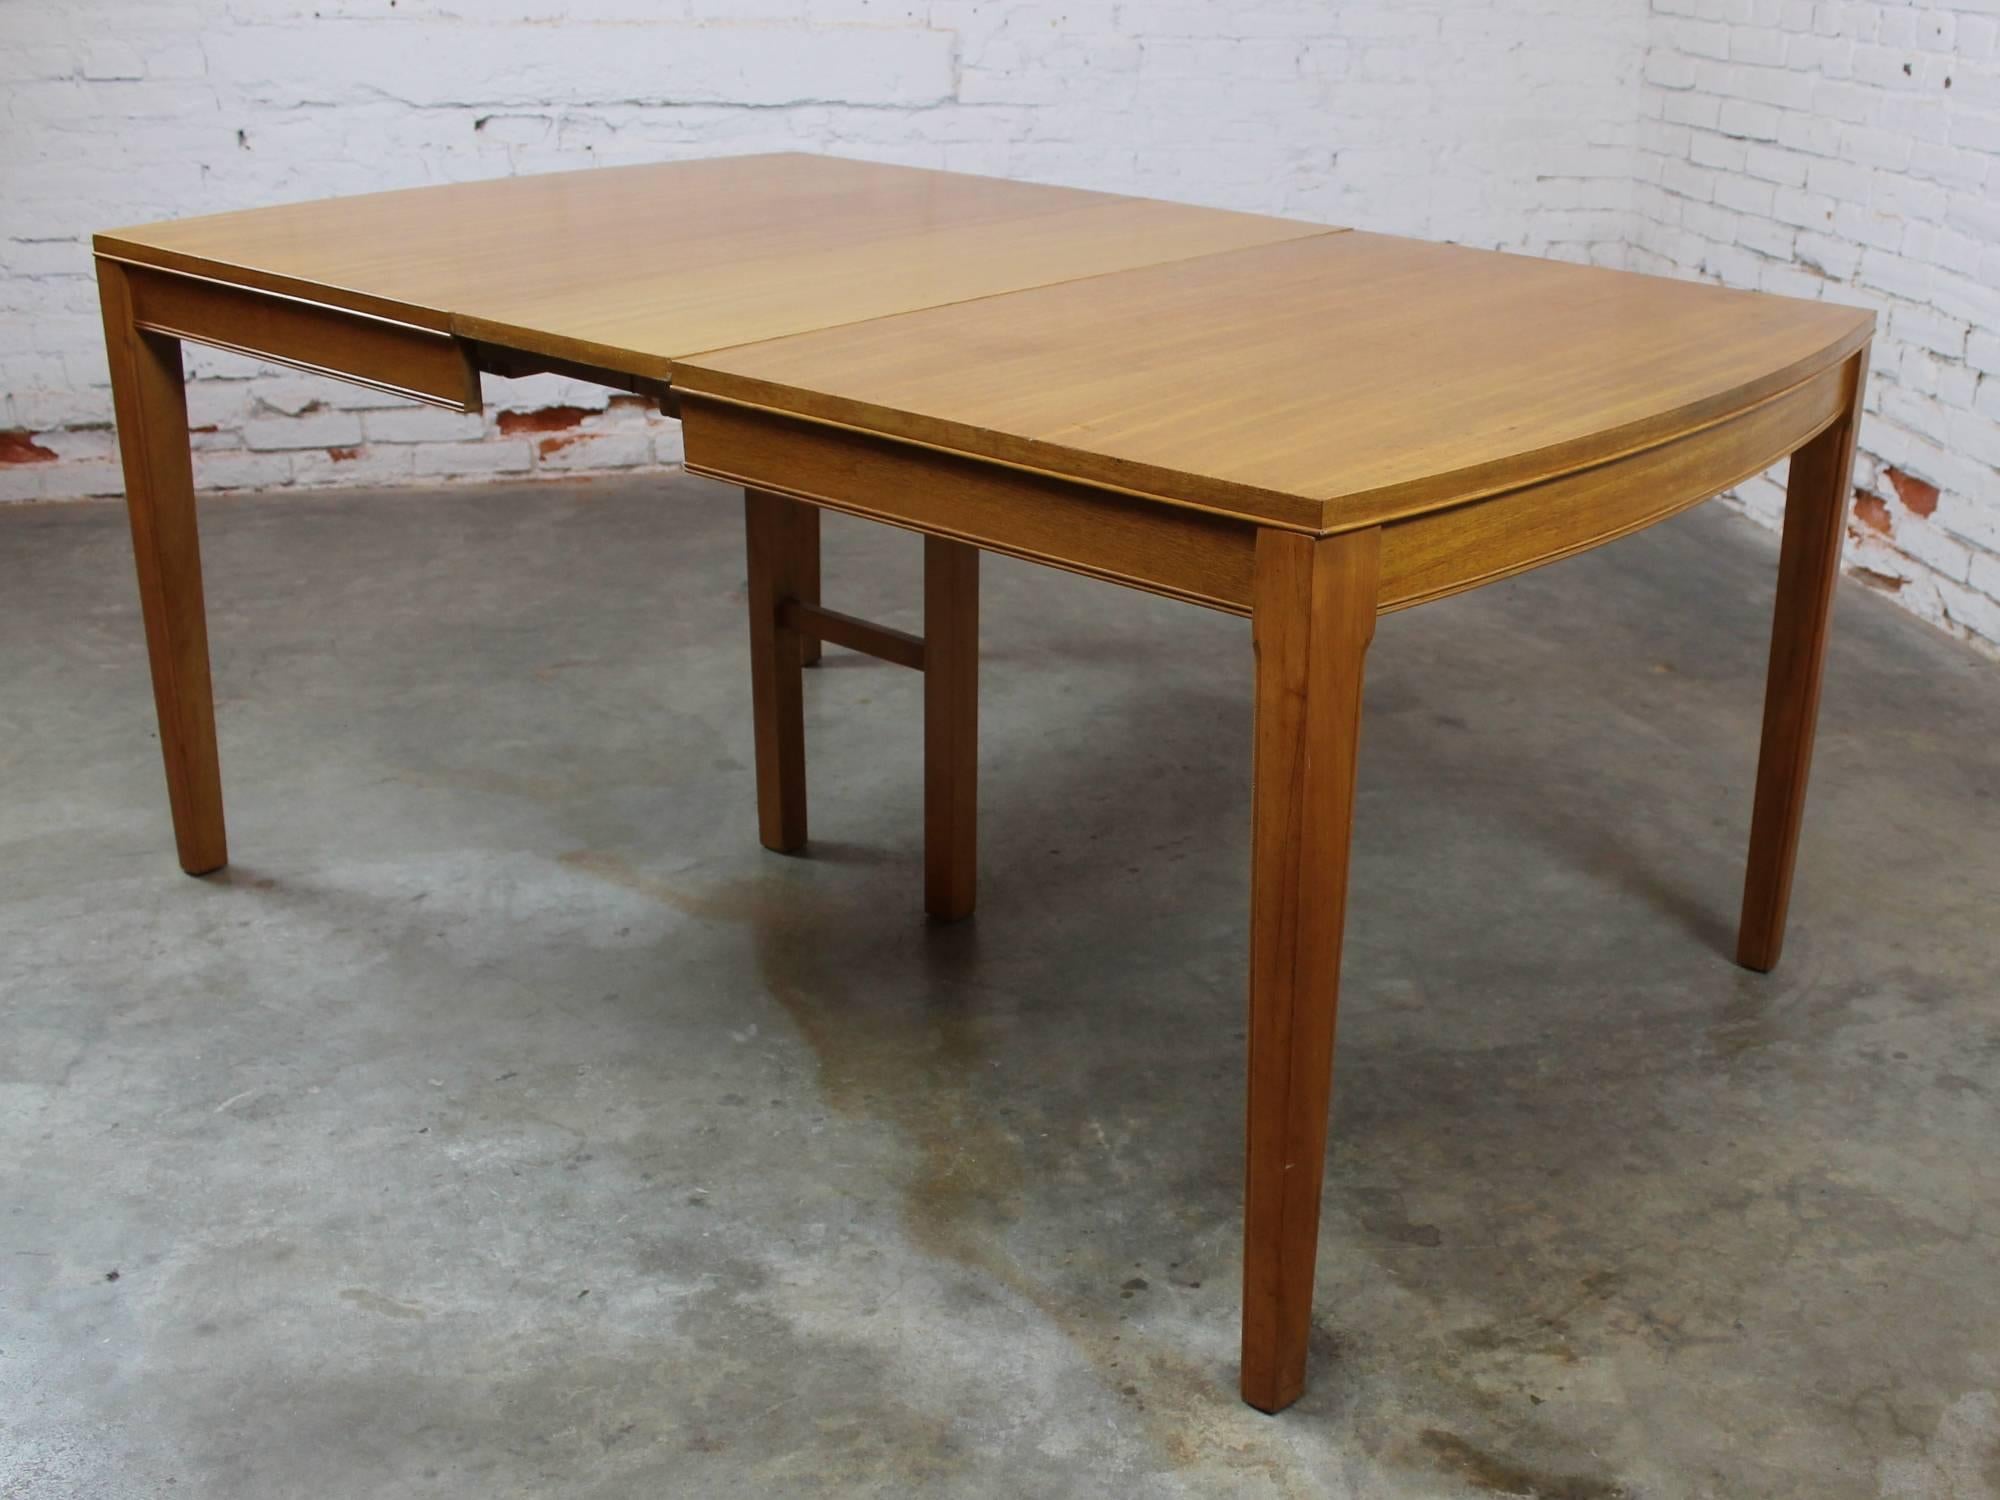 Vintage Mid-Century Modern Mahogany Dining Table In Good Condition For Sale In Topeka, KS